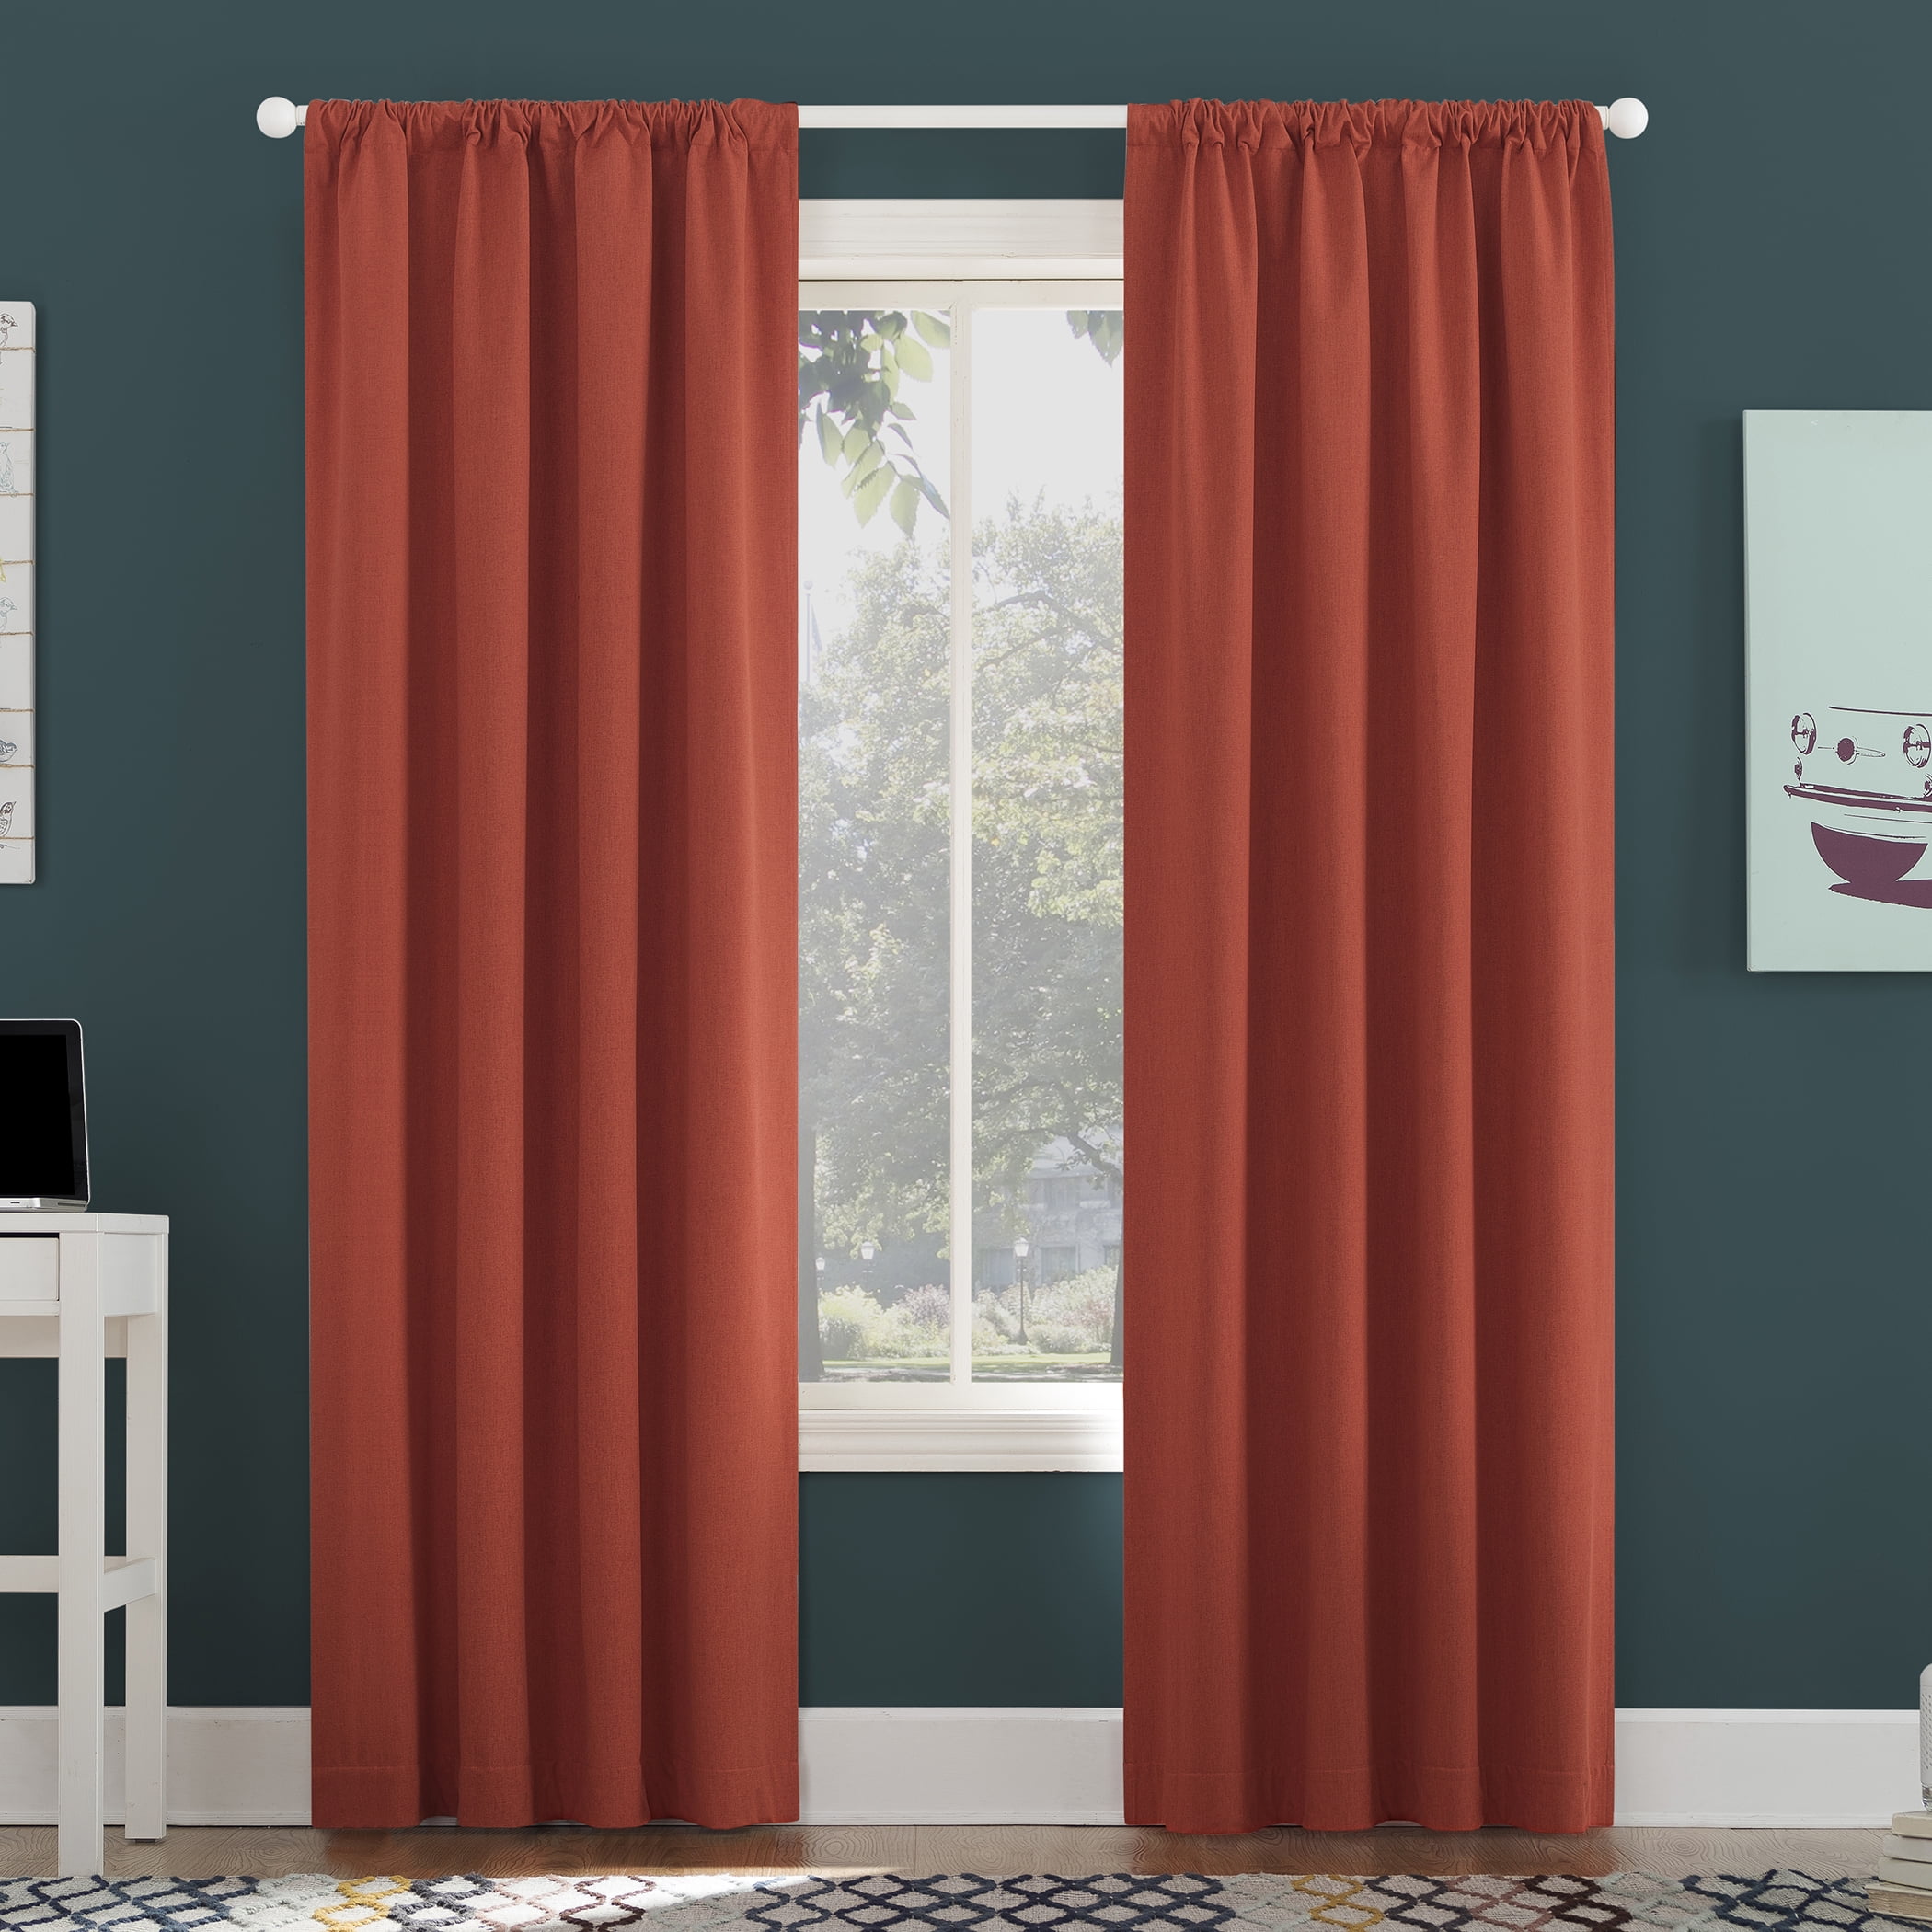 Details about   Black 144 inch Long Fire Treated/Rated Velvet Curtain Panel w/Rod Pocket Drape 